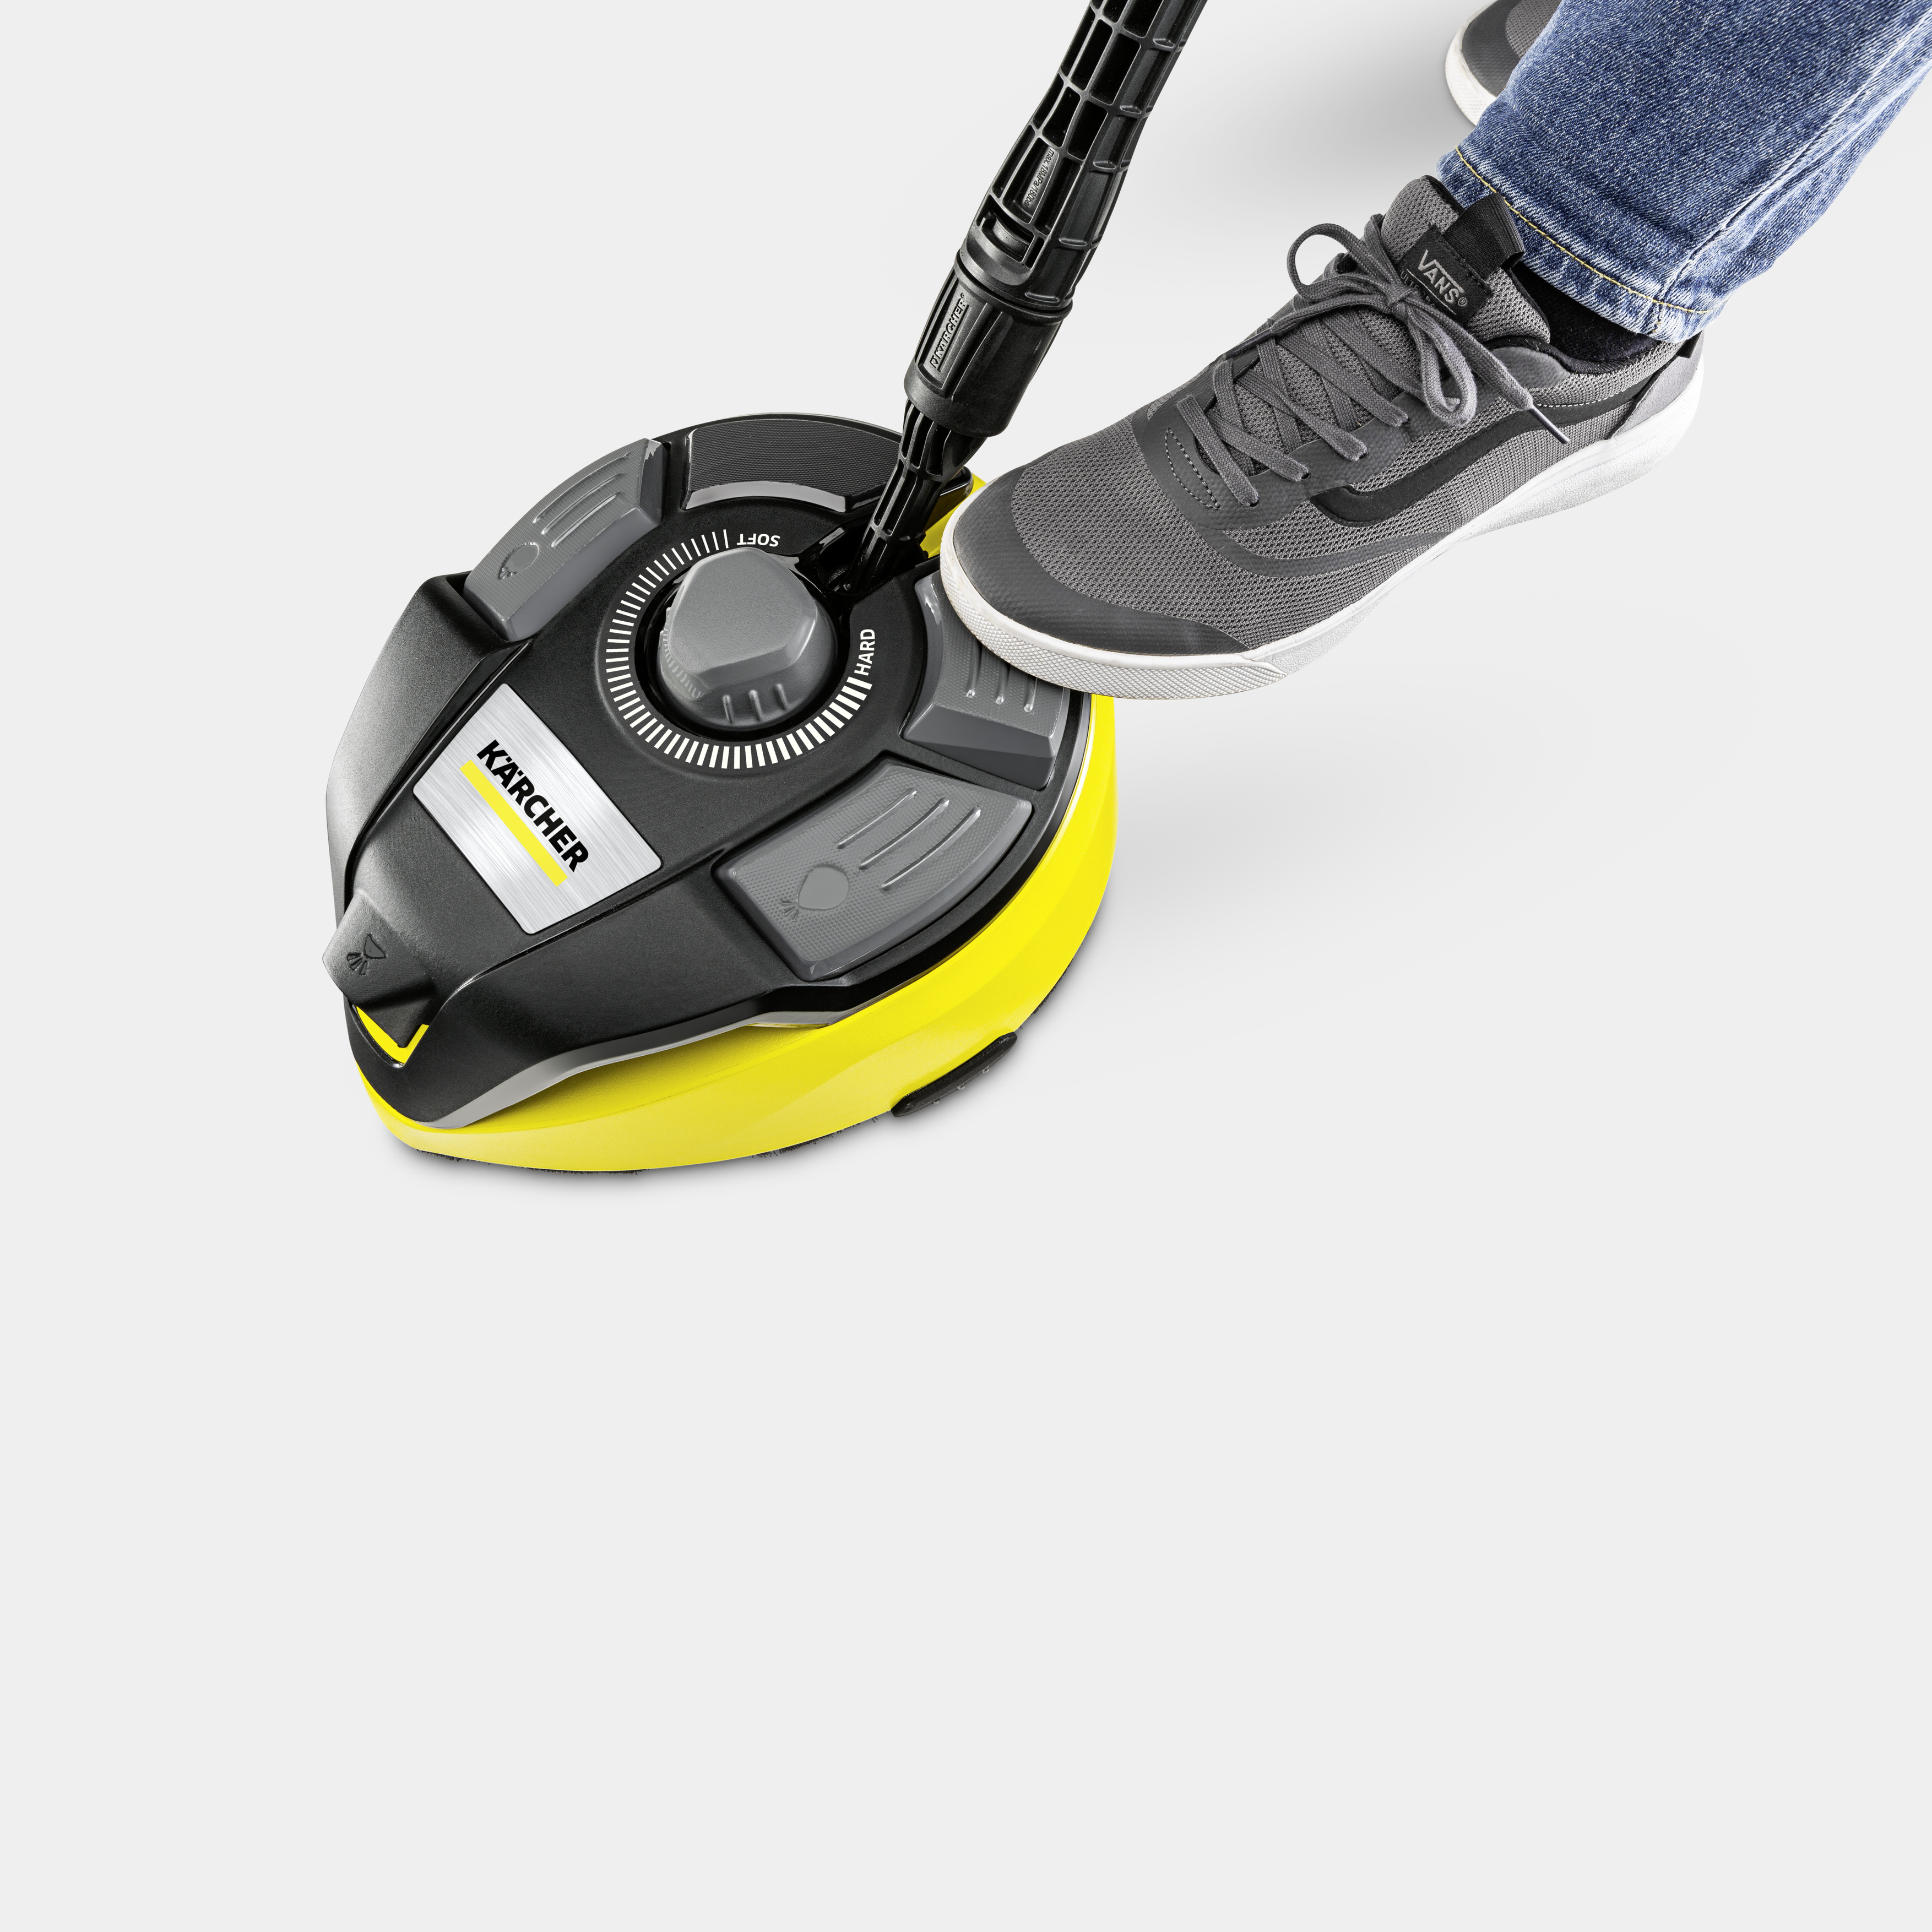 T 7 Plus T-Racer surface cleaner - 3